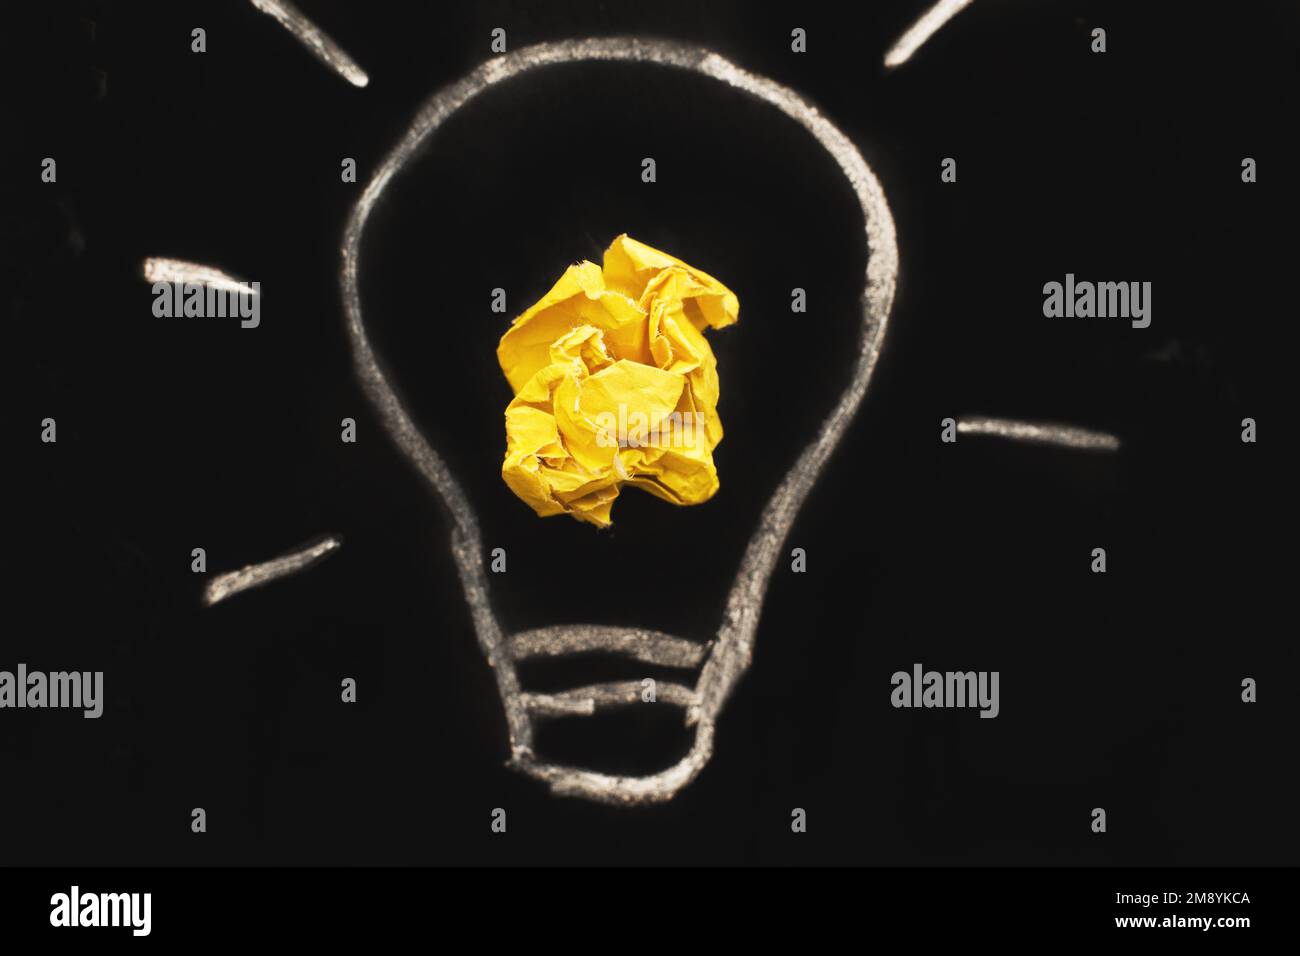 crumpled yelllow paper laightbulb as a concept creative idea and innovation on a blackboard background. Stock Photo